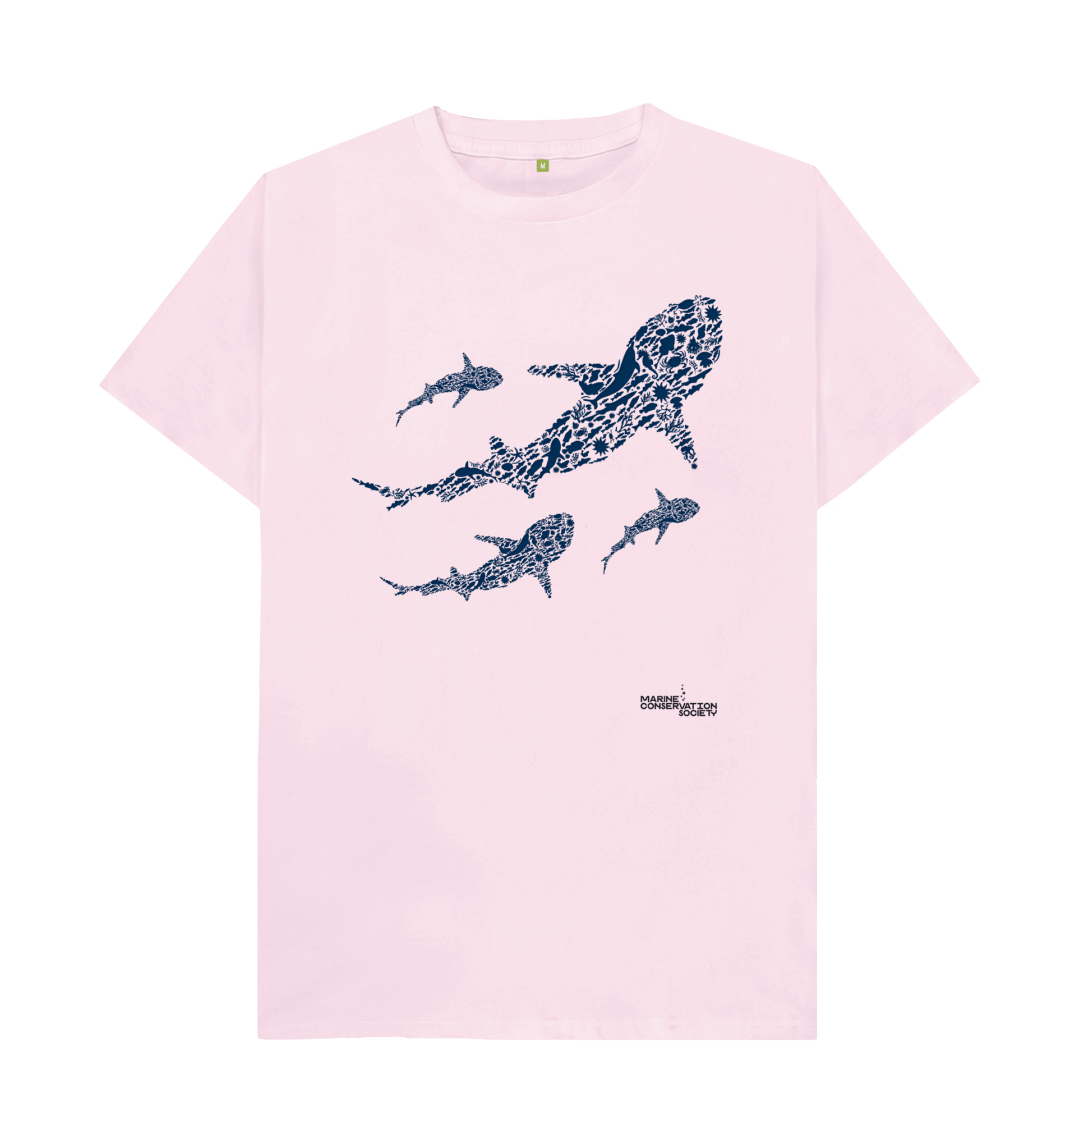 Save Our Seas T-shirt Navy Version